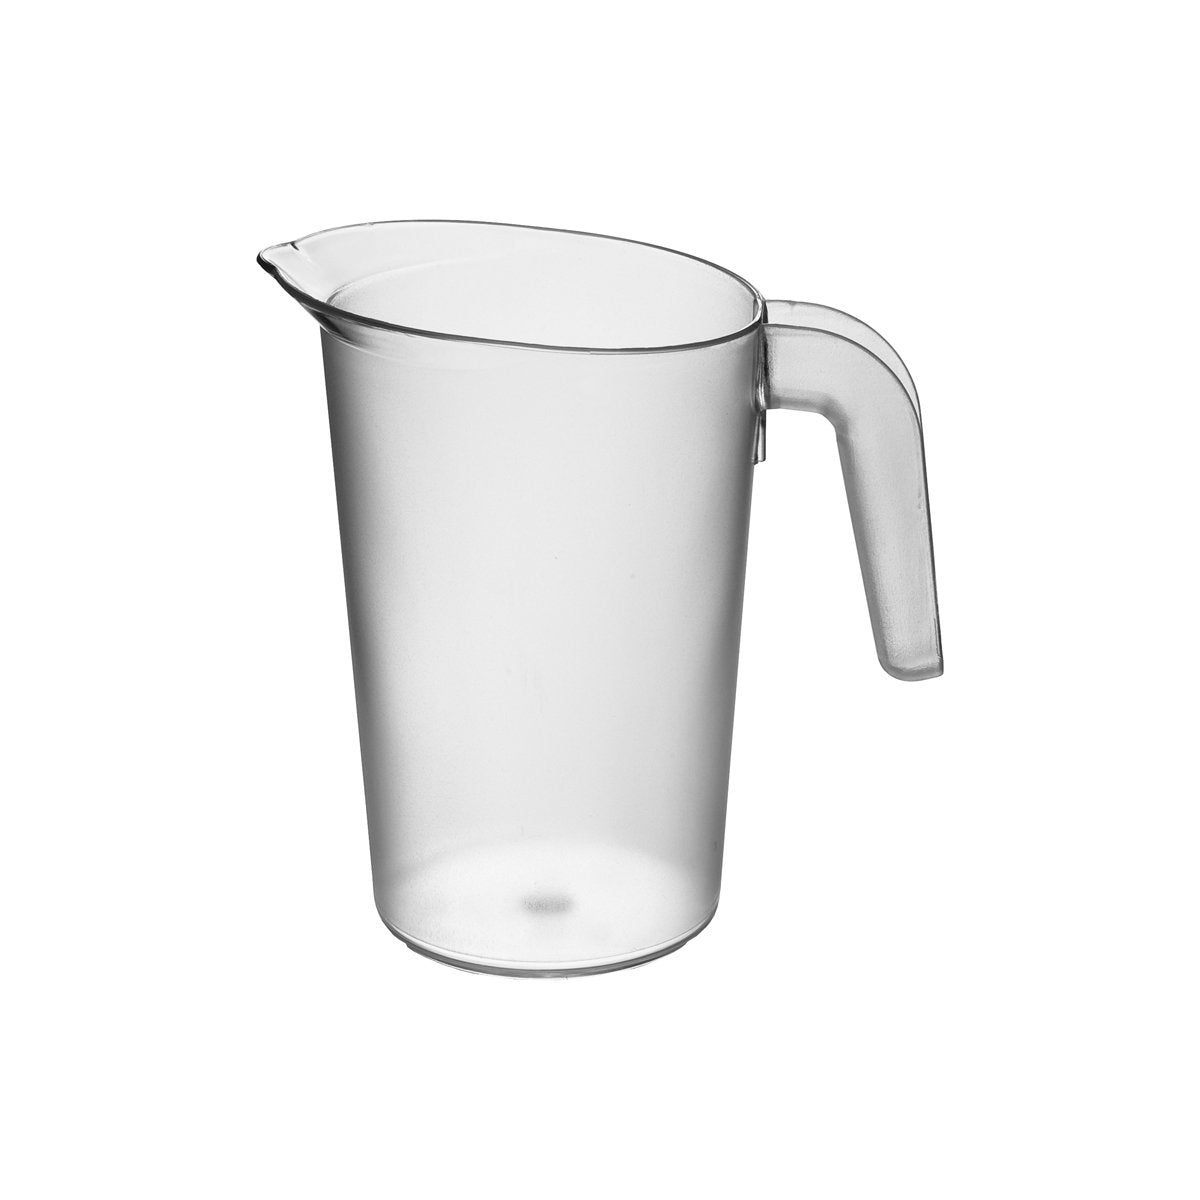 ROLTEXR100CL Roltex Polycarbonate Pitcher Clear 1000ml Tomkin Australia Hospitality Supplies